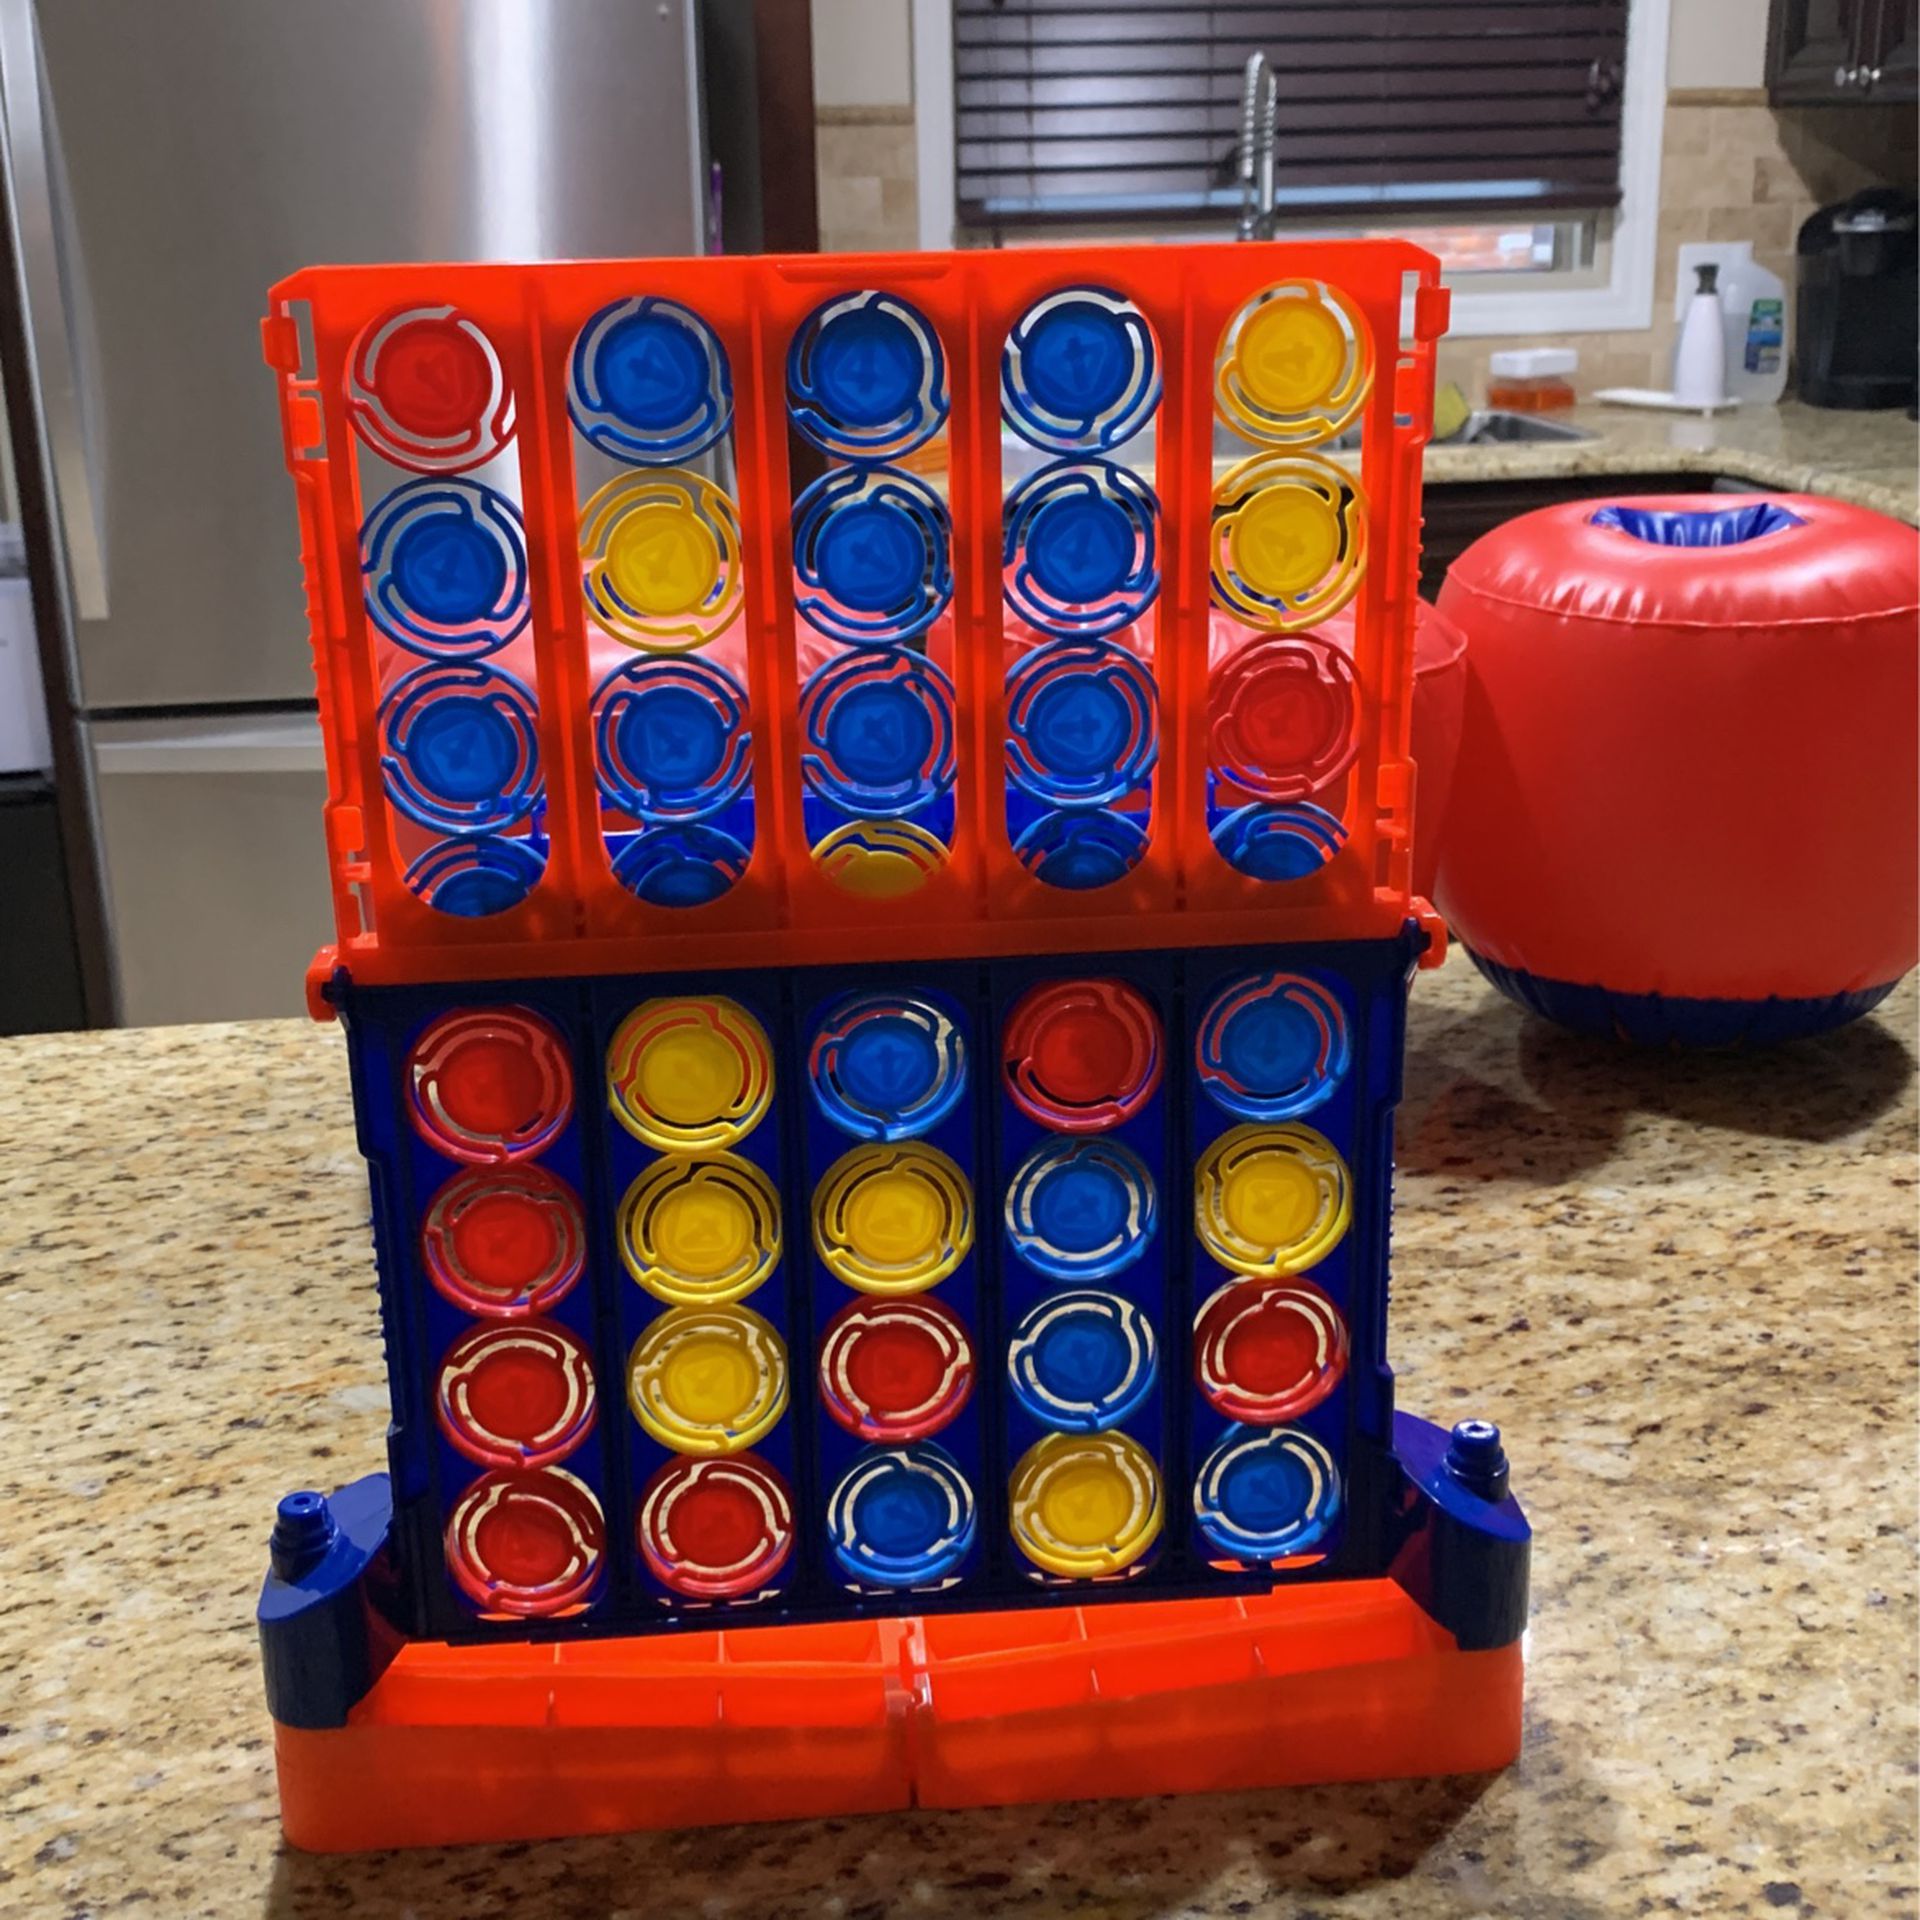 Toy Connect 4